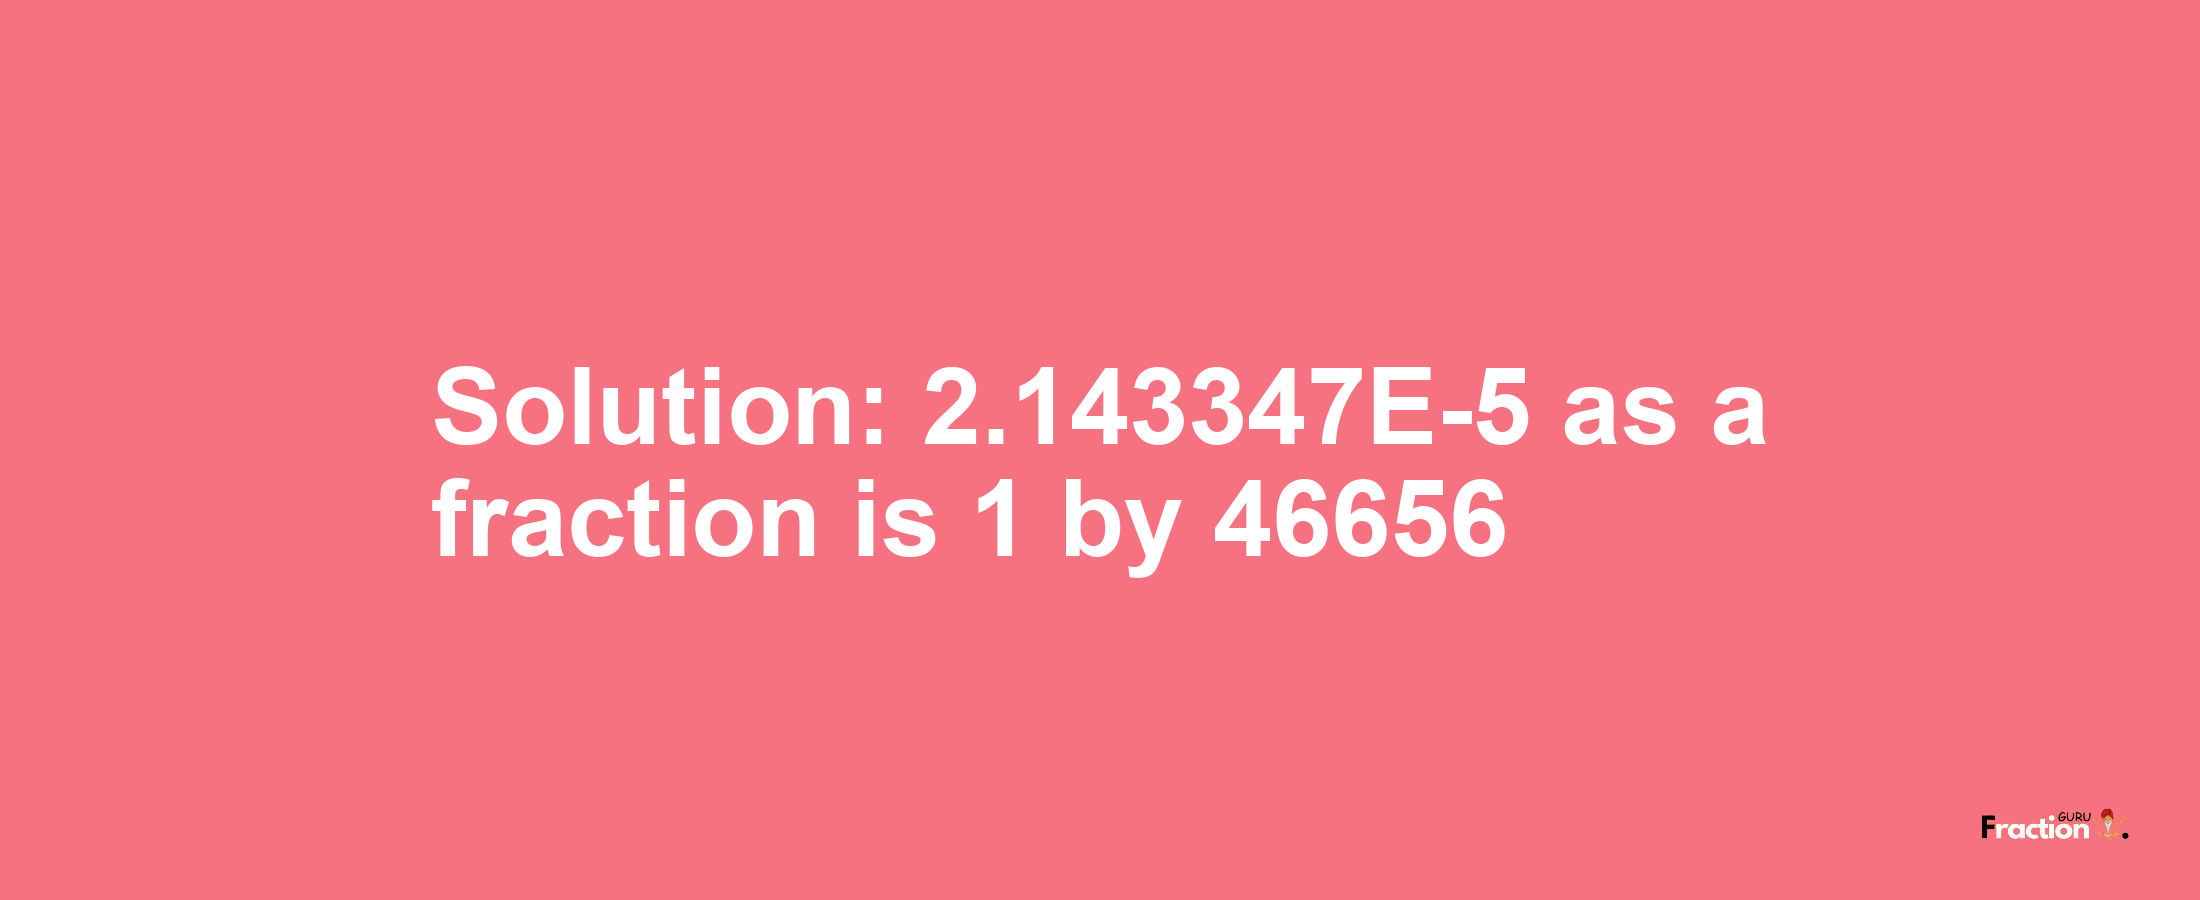 Solution:2.143347E-5 as a fraction is 1/46656